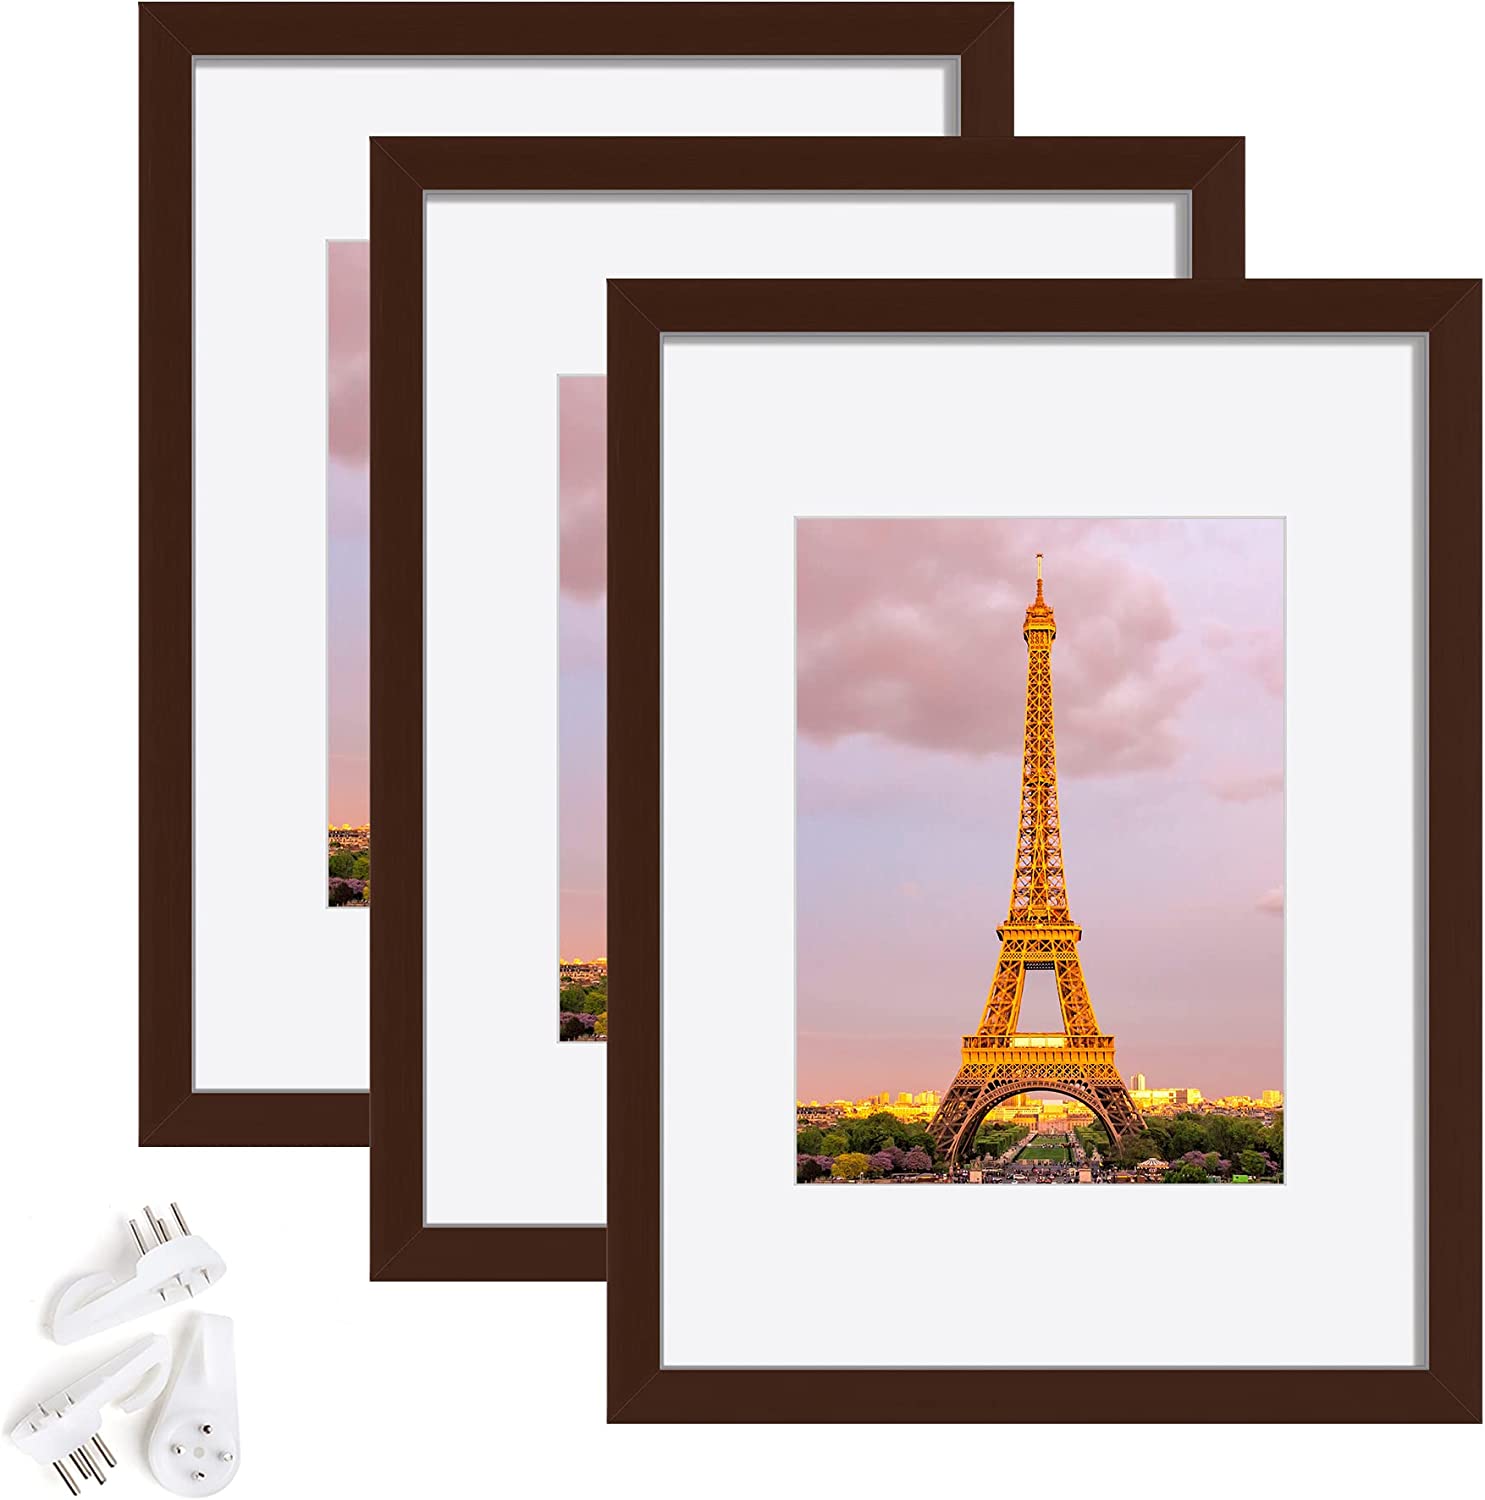 upsimples 12x12 Picture Frame Made of High Definition Glass, Display  Pictures 8x8 with Mat or 12x12 Without Mat, Gallery Wall Frame Set, Brown